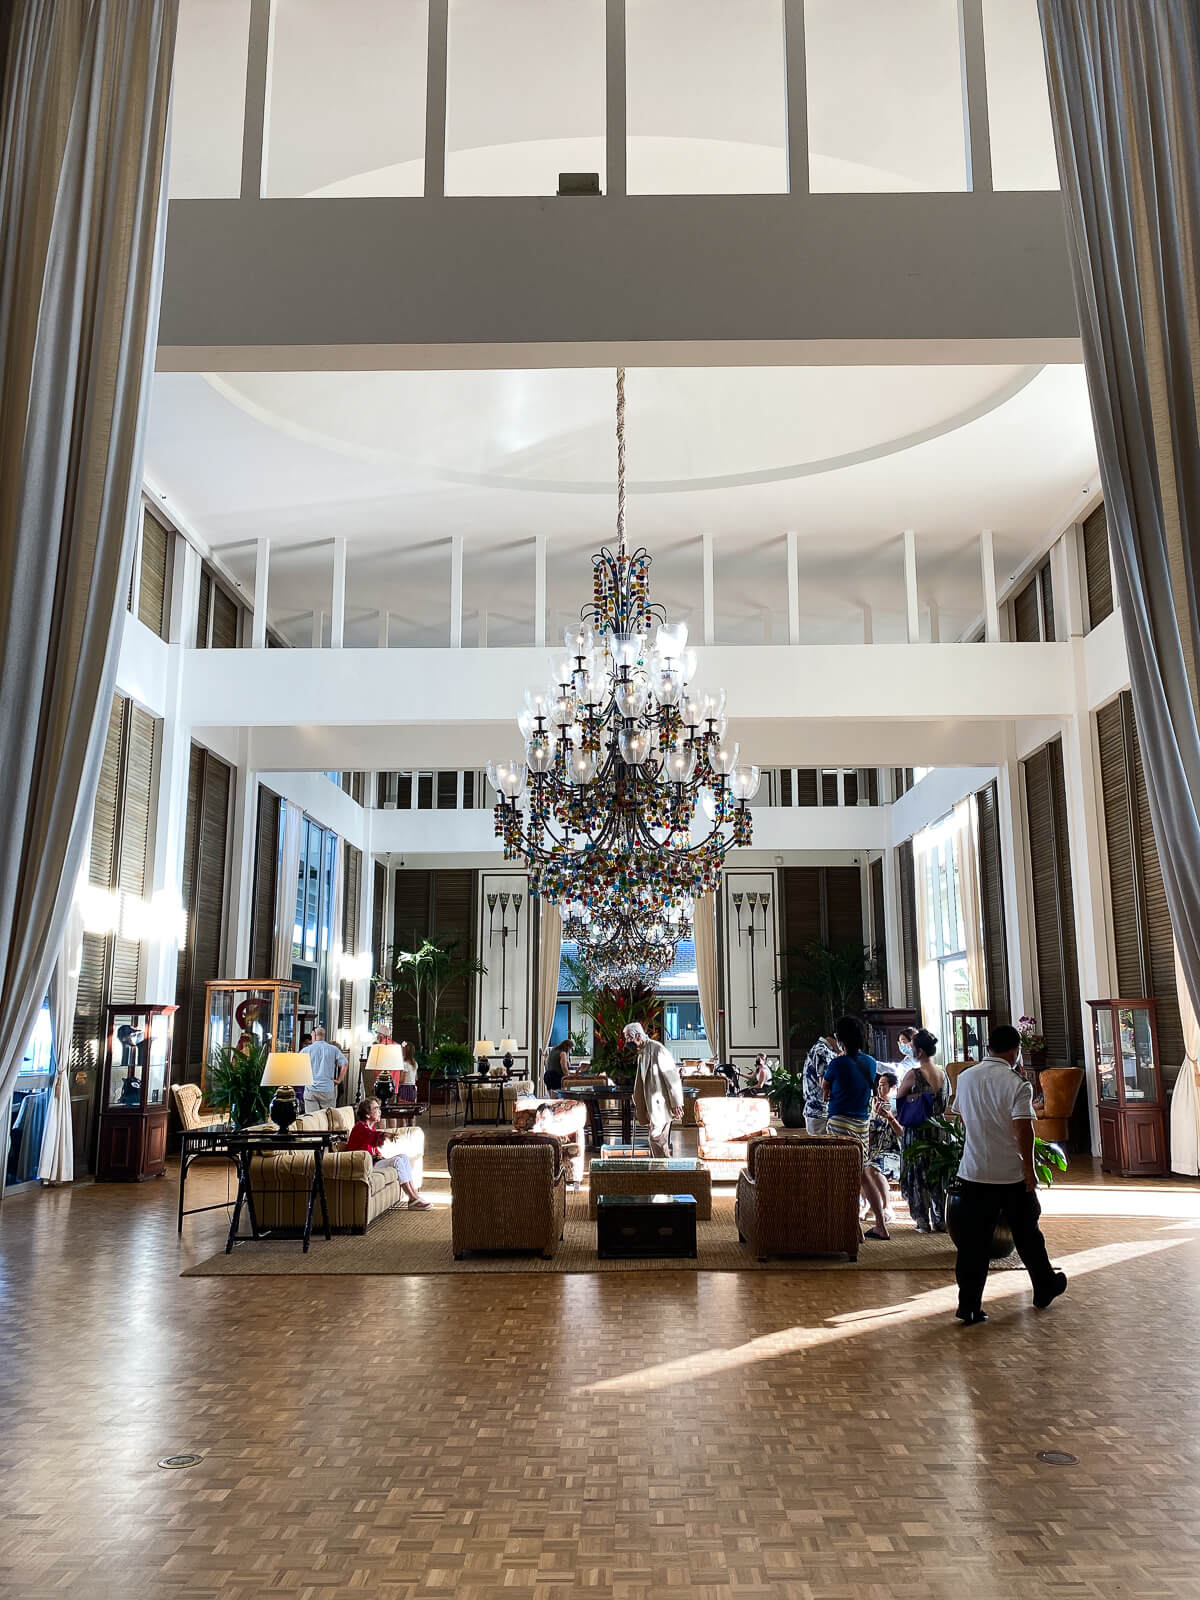 The grand lobby at the Kahala hotel with large chandelier and high ceilings. 